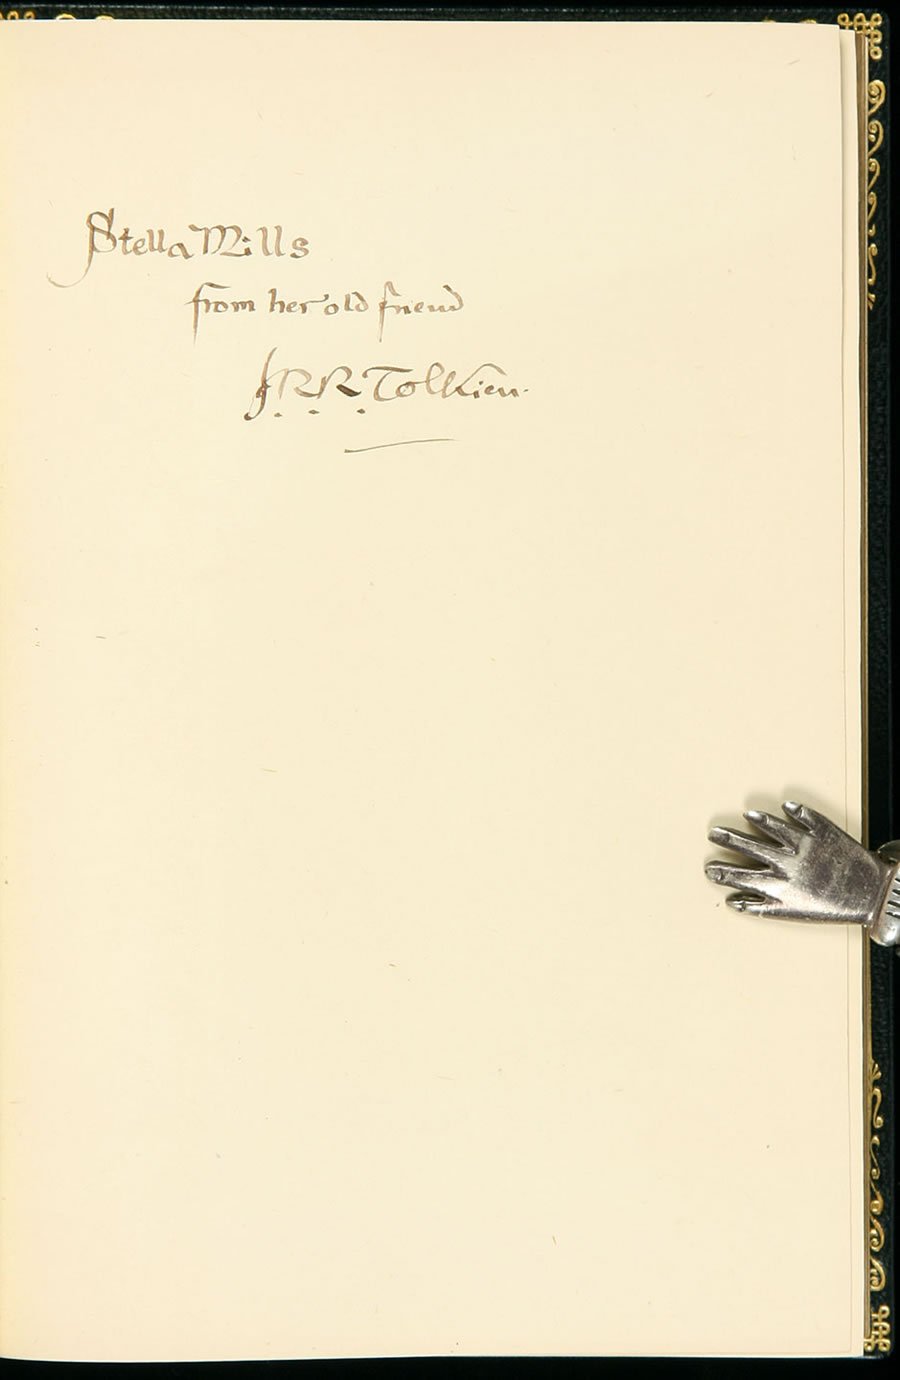 An important association copy, inscribed by the author on the front flyleaf, with "To Stella Mills, from her old friend, J.R.R. Tolkien," will be offered for auction at PBA galleries in London on the 25th of June.